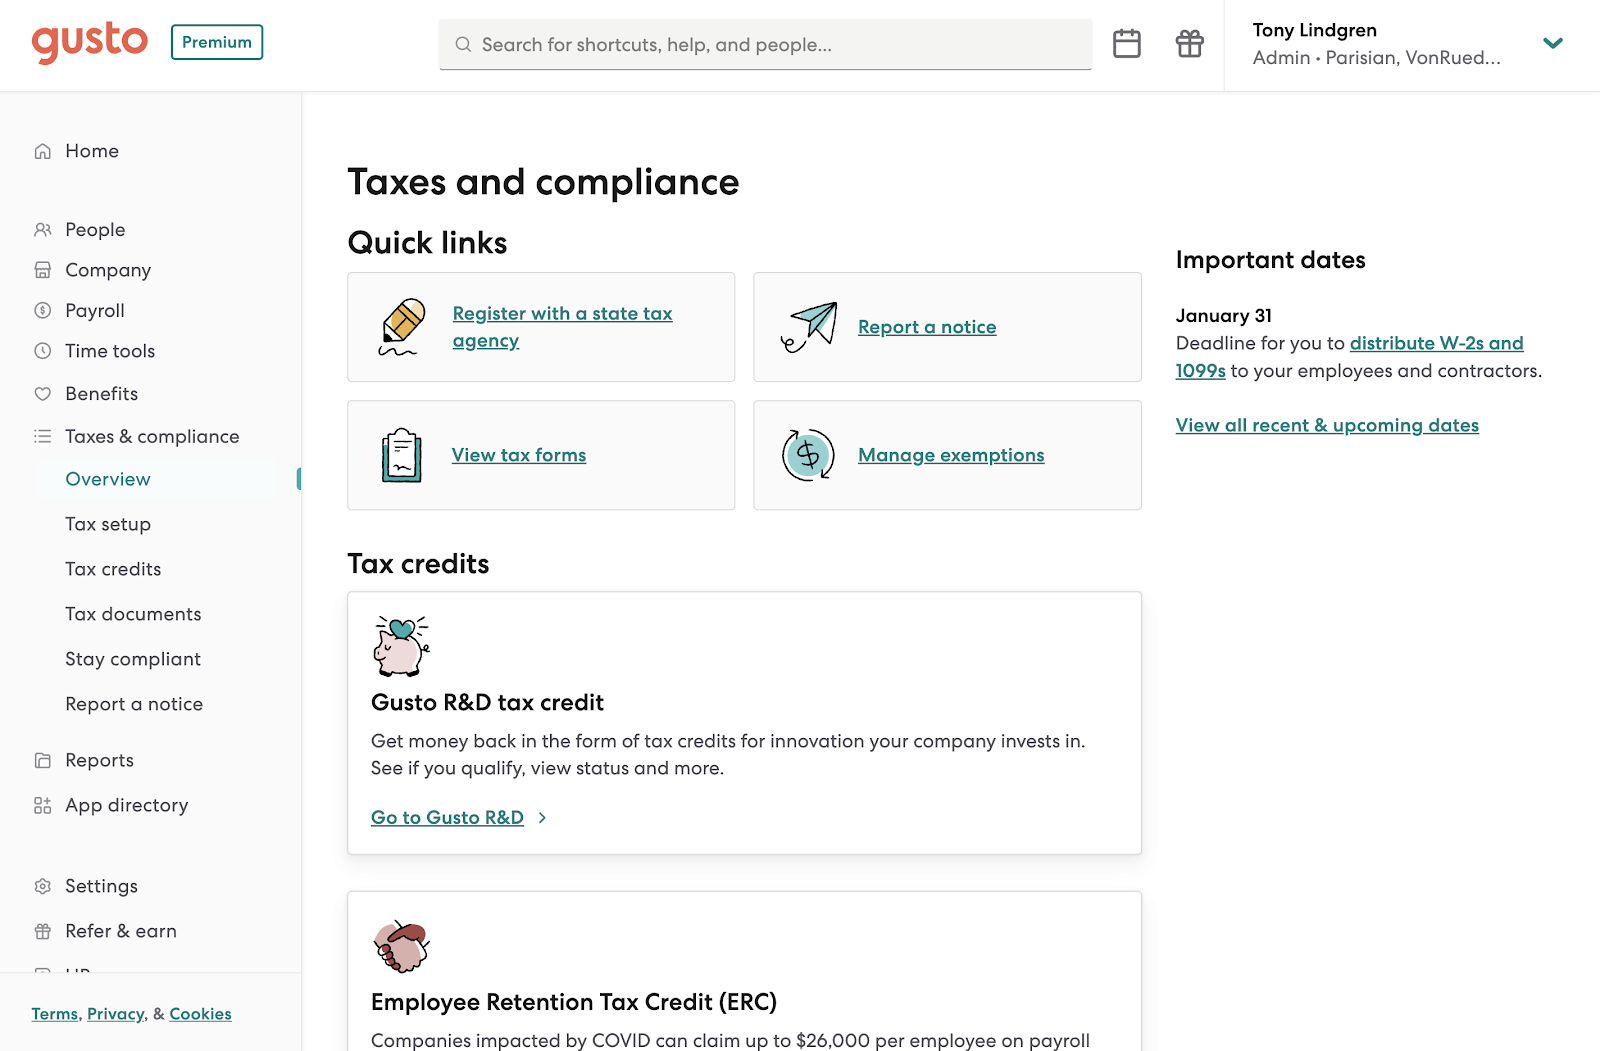 Gusto displays a taxes and compliance dashboard with quick links to register with a state tax agency, report a notice, view tax forms, and manage exemptions, plus information on R&D and ERC tax credits.